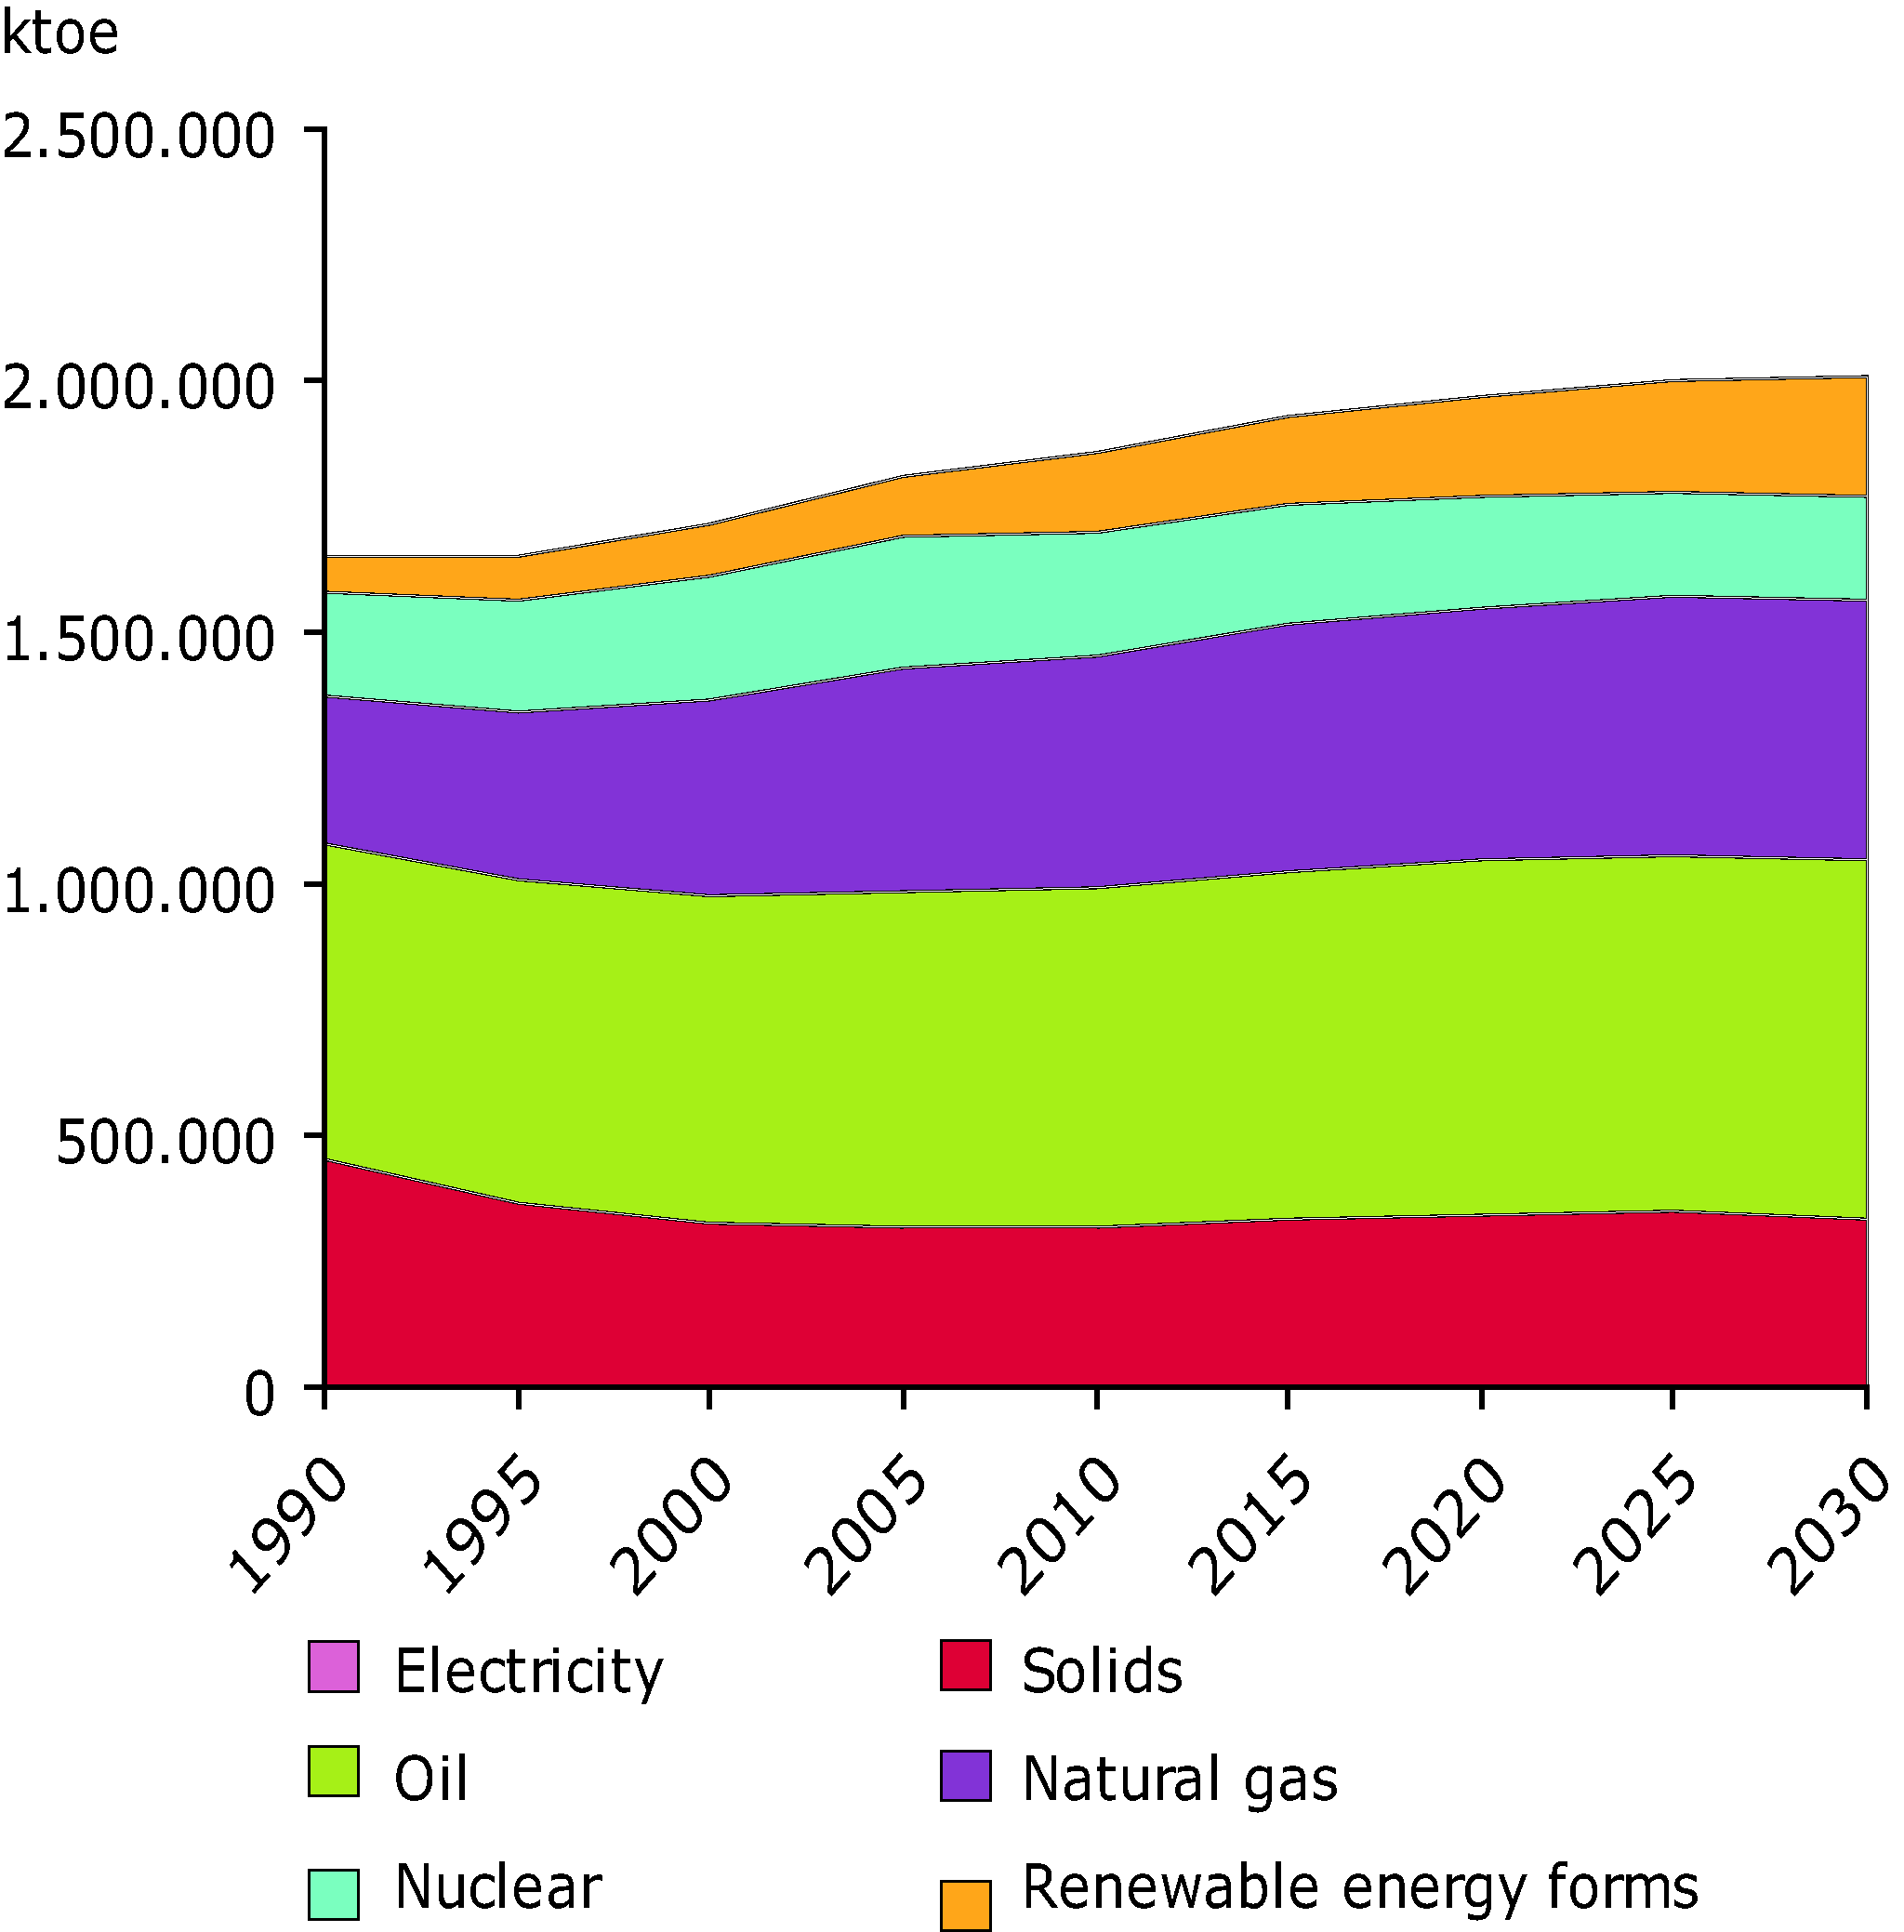 Total Energy Consumption in EU 27 from 1990 to 2005 and projected Total Energy Consumption to 2030